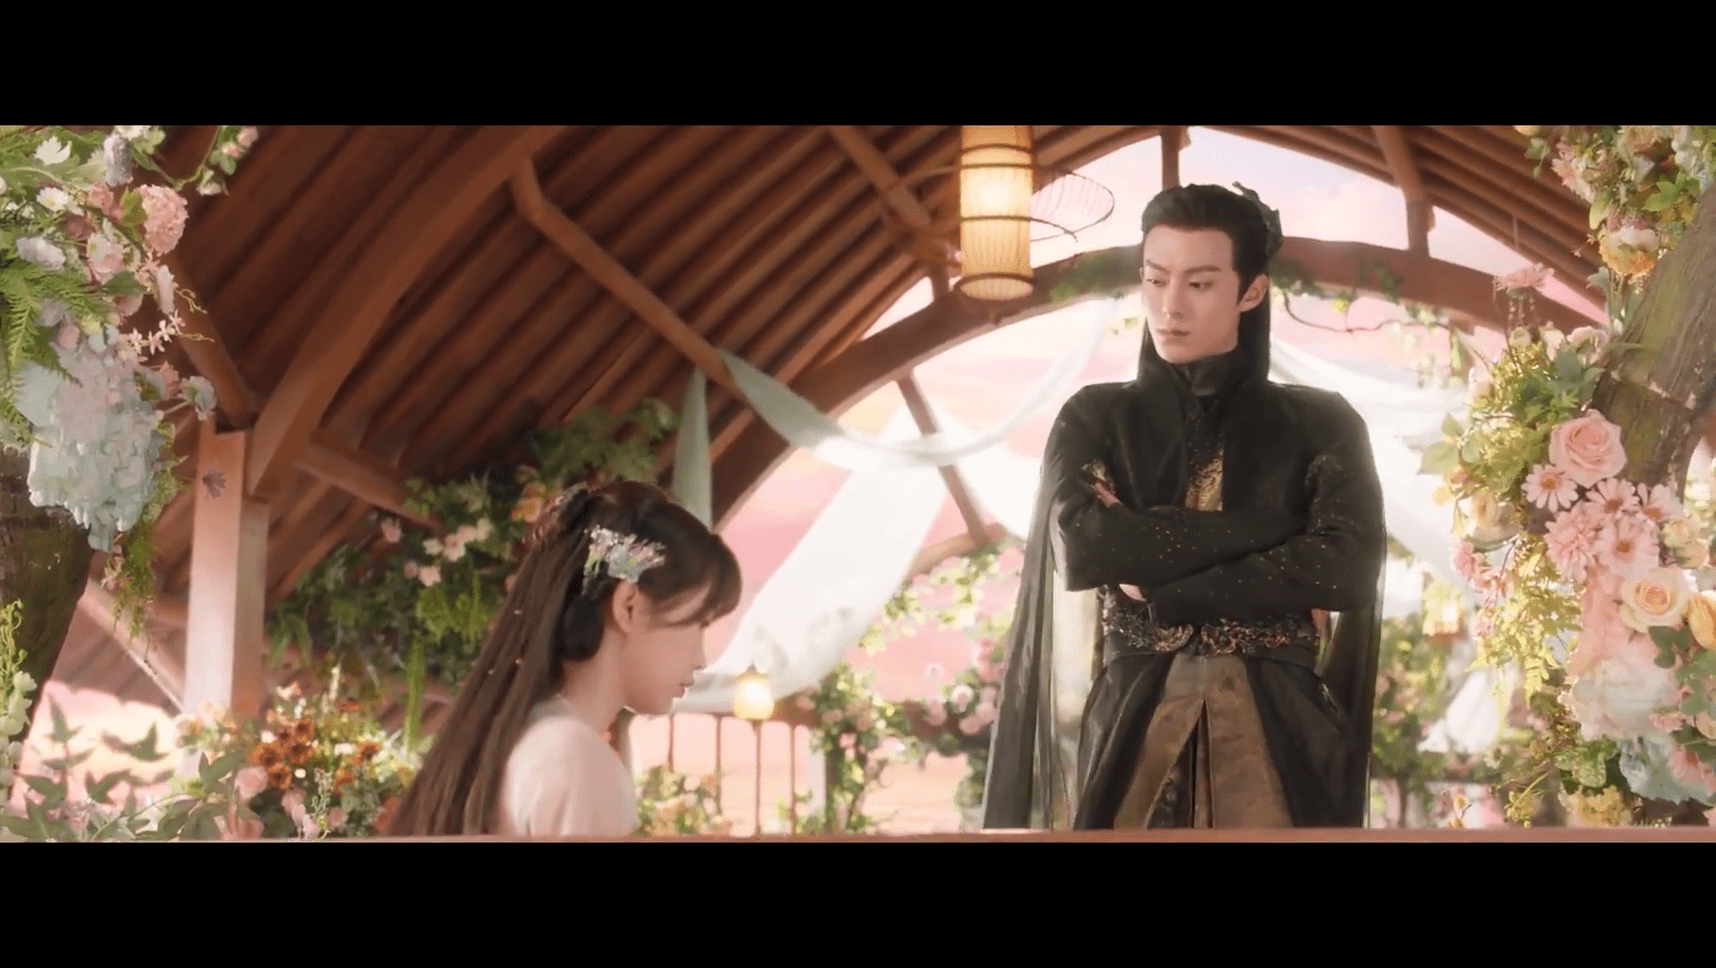 Orchid played by Yu Shu Xin with Dongfang Qing Cang played by Wang He Di in episode 8 of Love Between Fairy and Devil